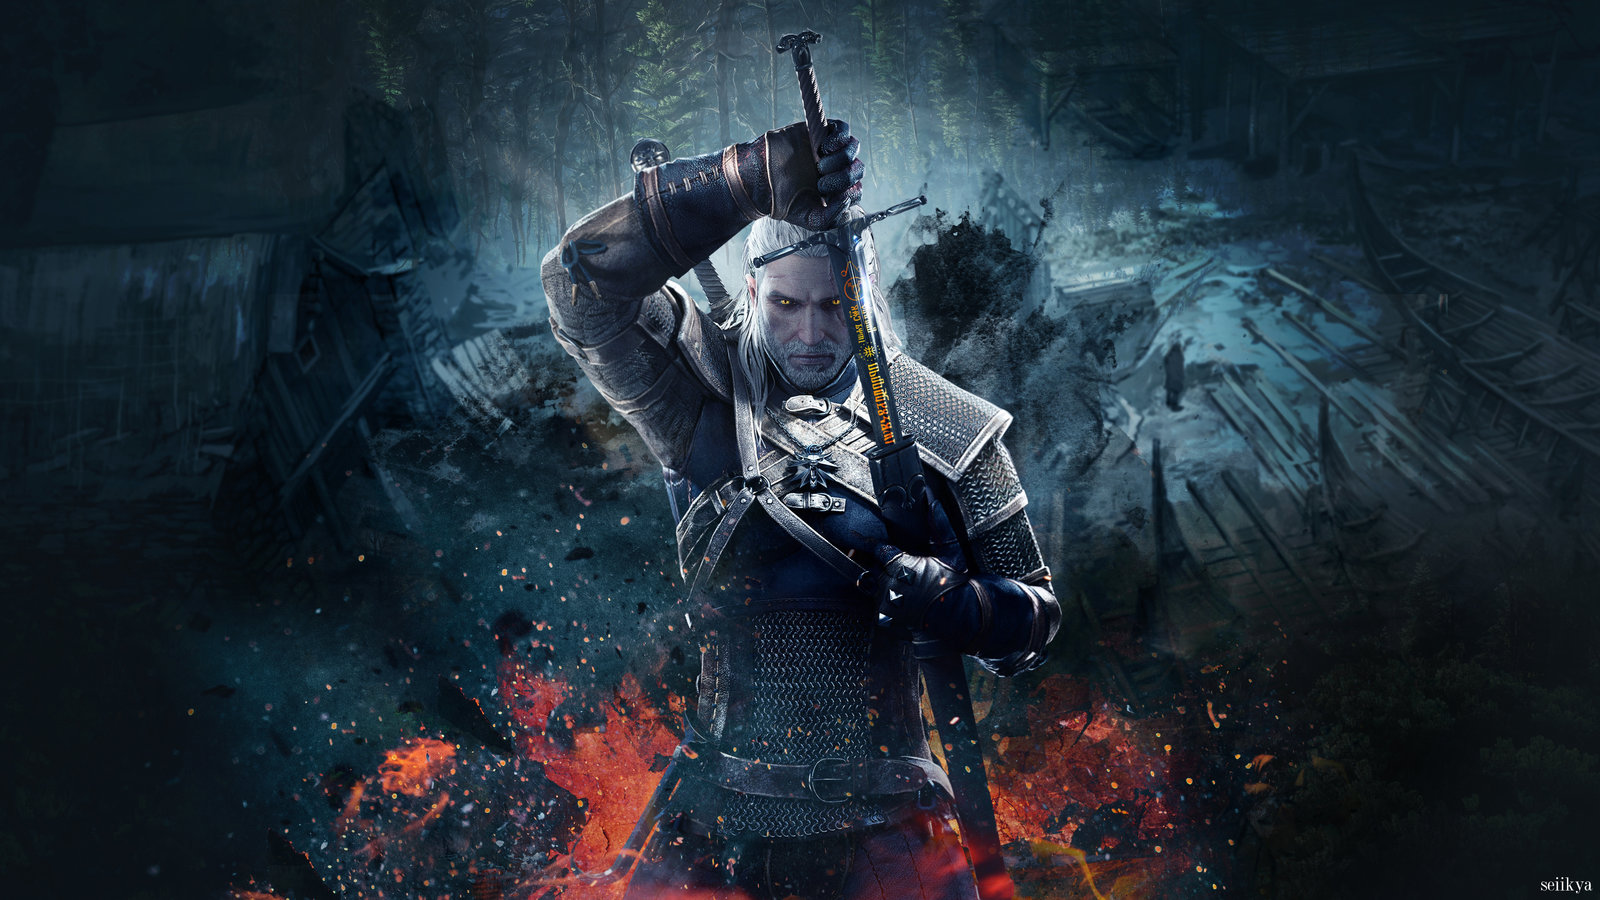 witcher 3 hd wallpaper,action adventure game,pc game,darkness,movie,games